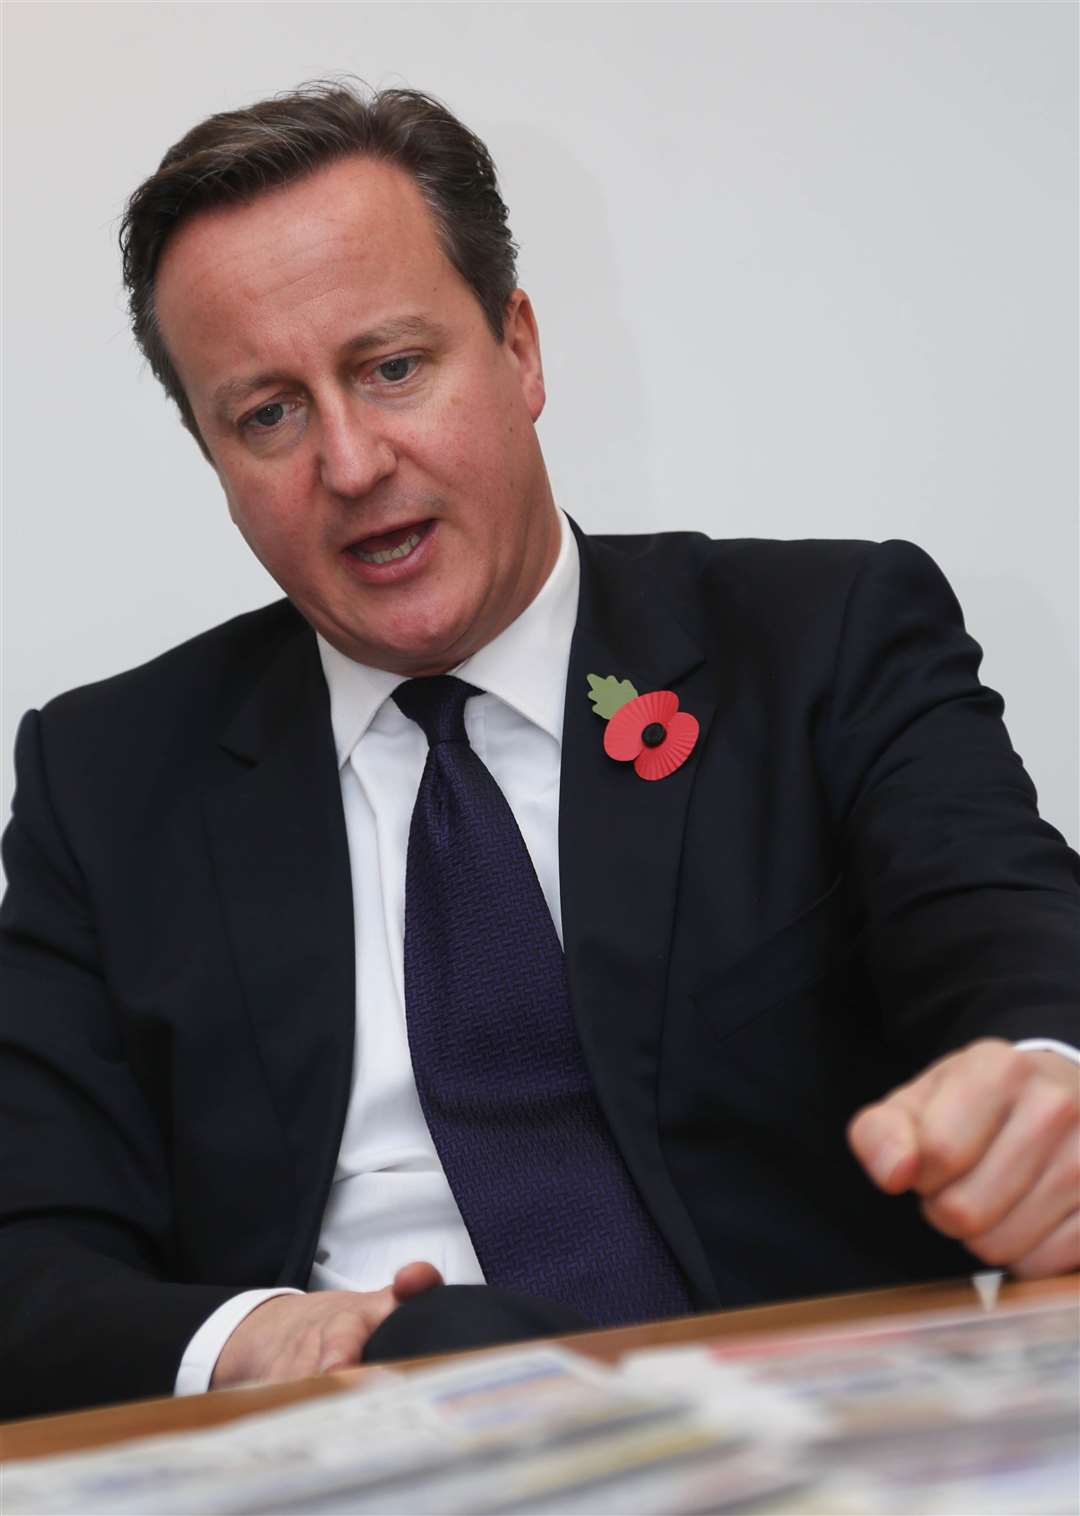 David Cameron pictured during a visit to Medway